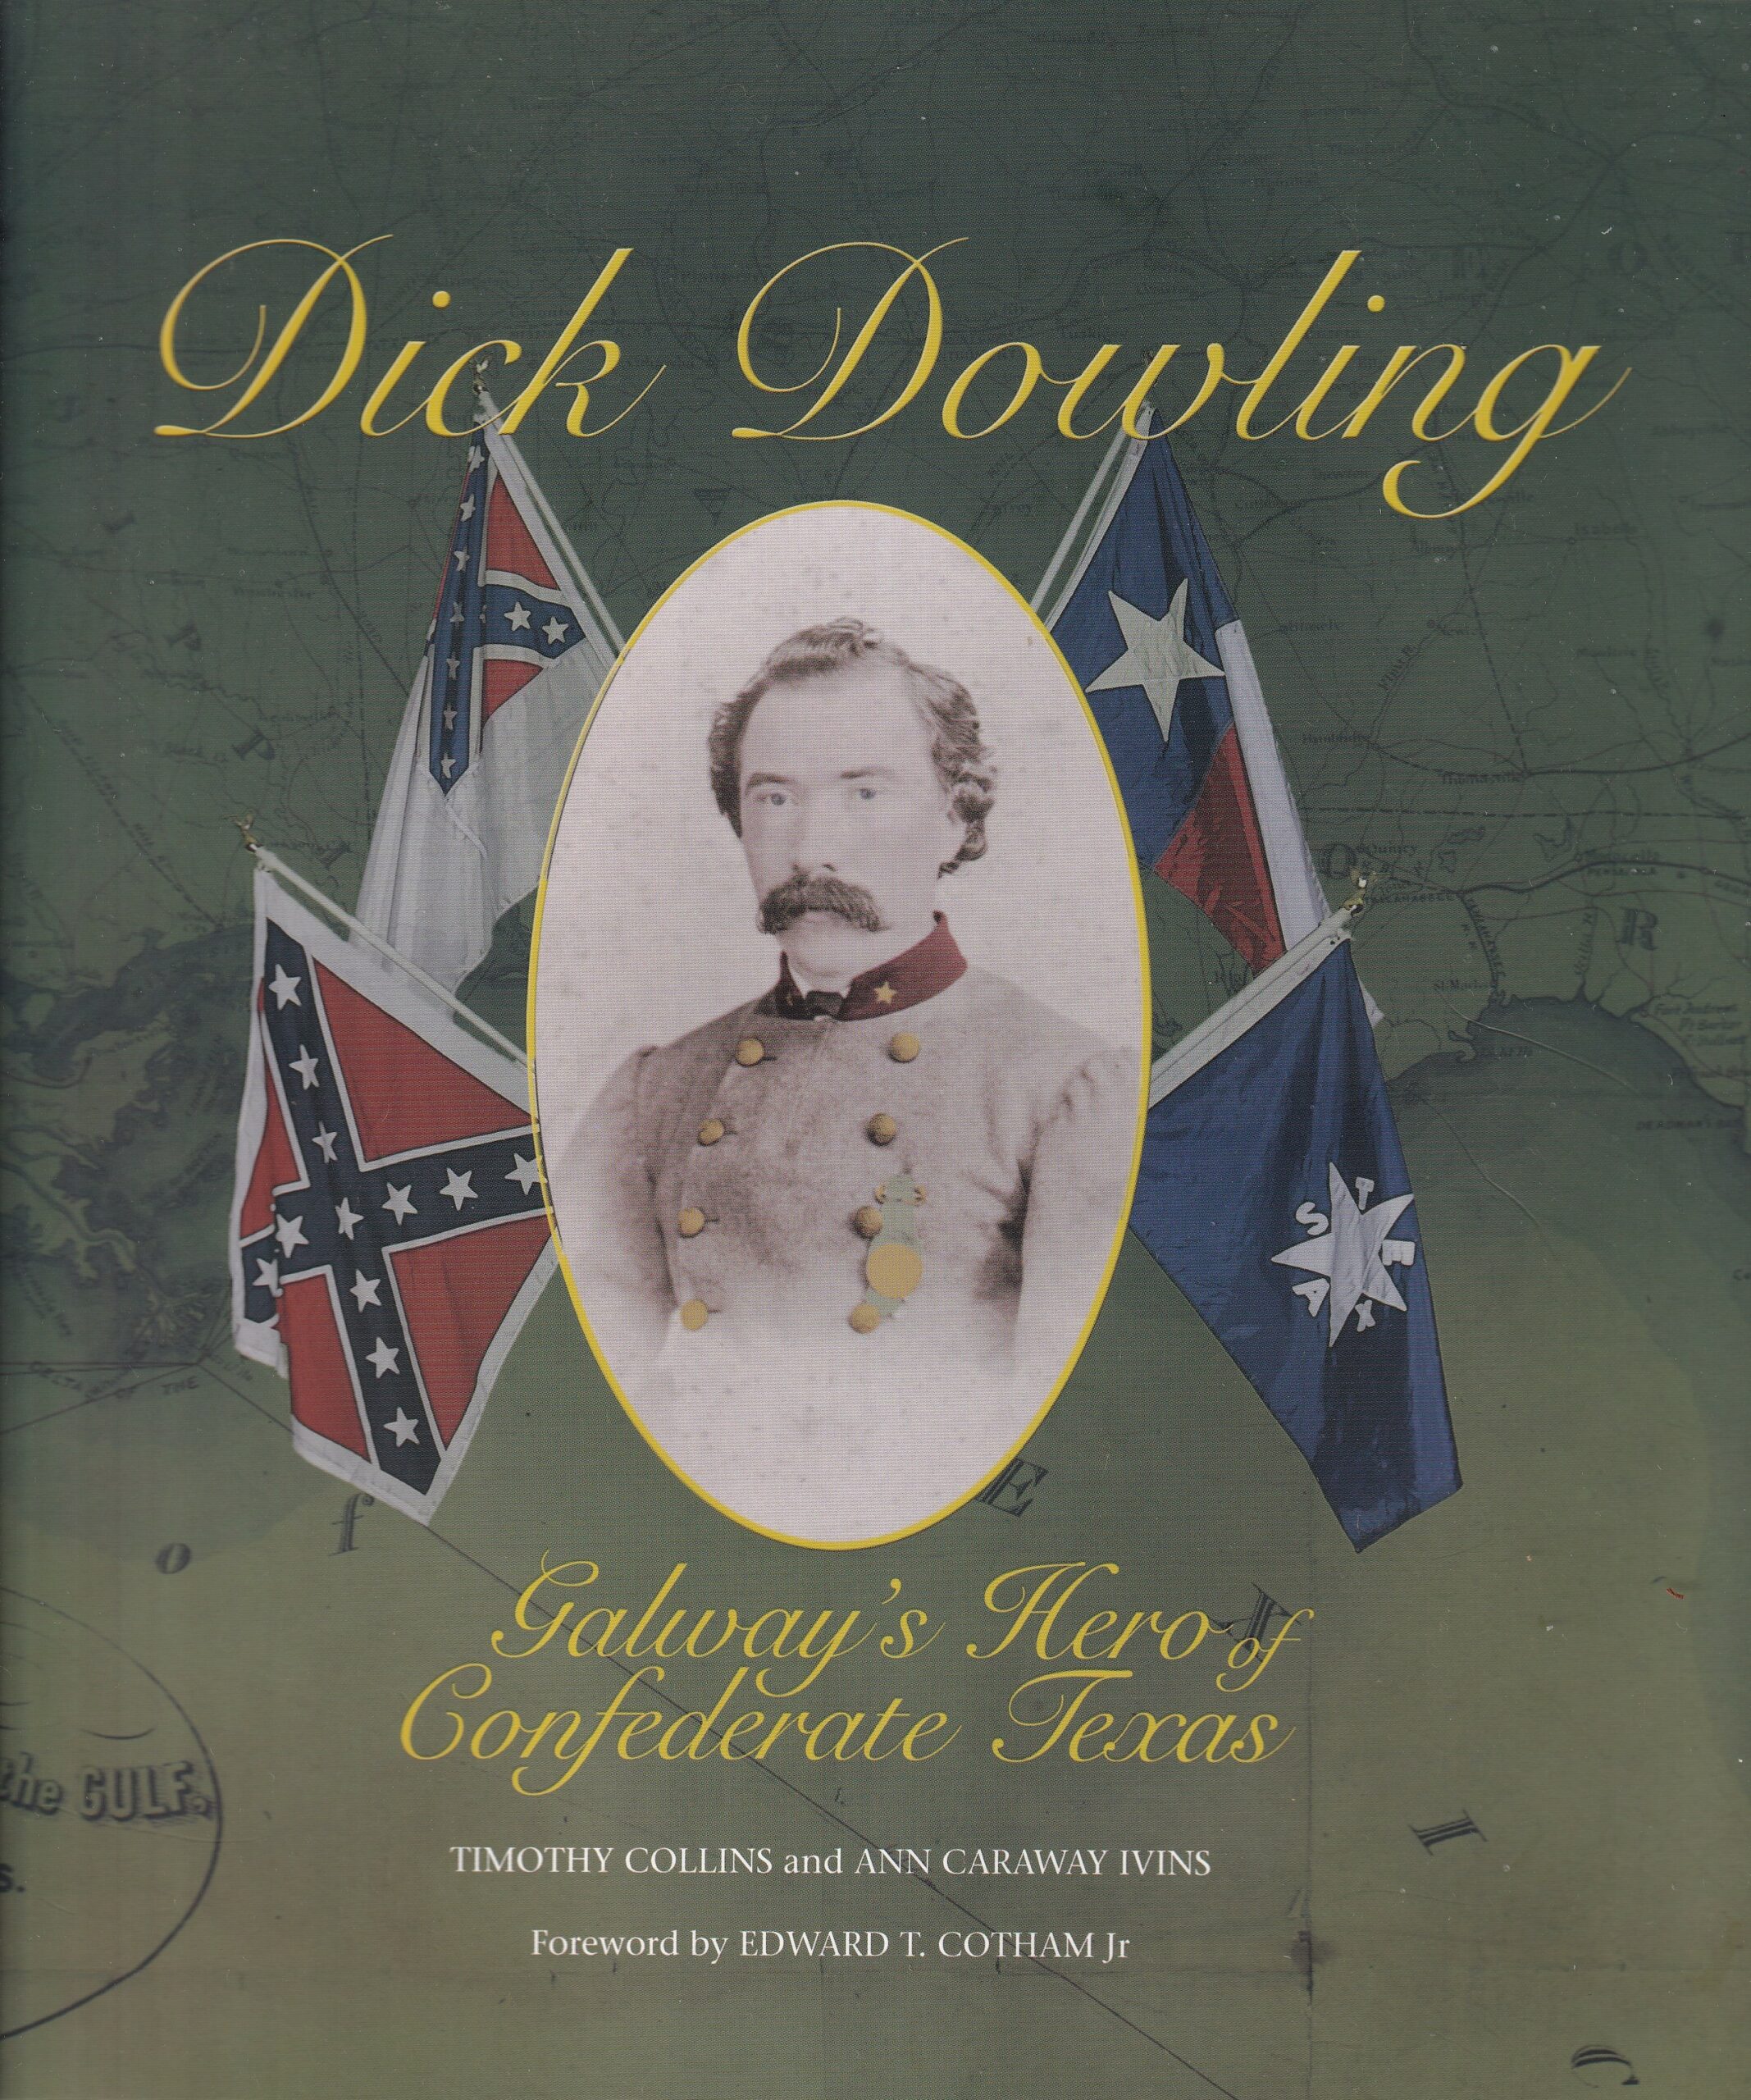 Dick Dowling: Galway’s Hero of Confederate Texas | Timothy Collins and Ann Caraway Ivins | Charlie Byrne's